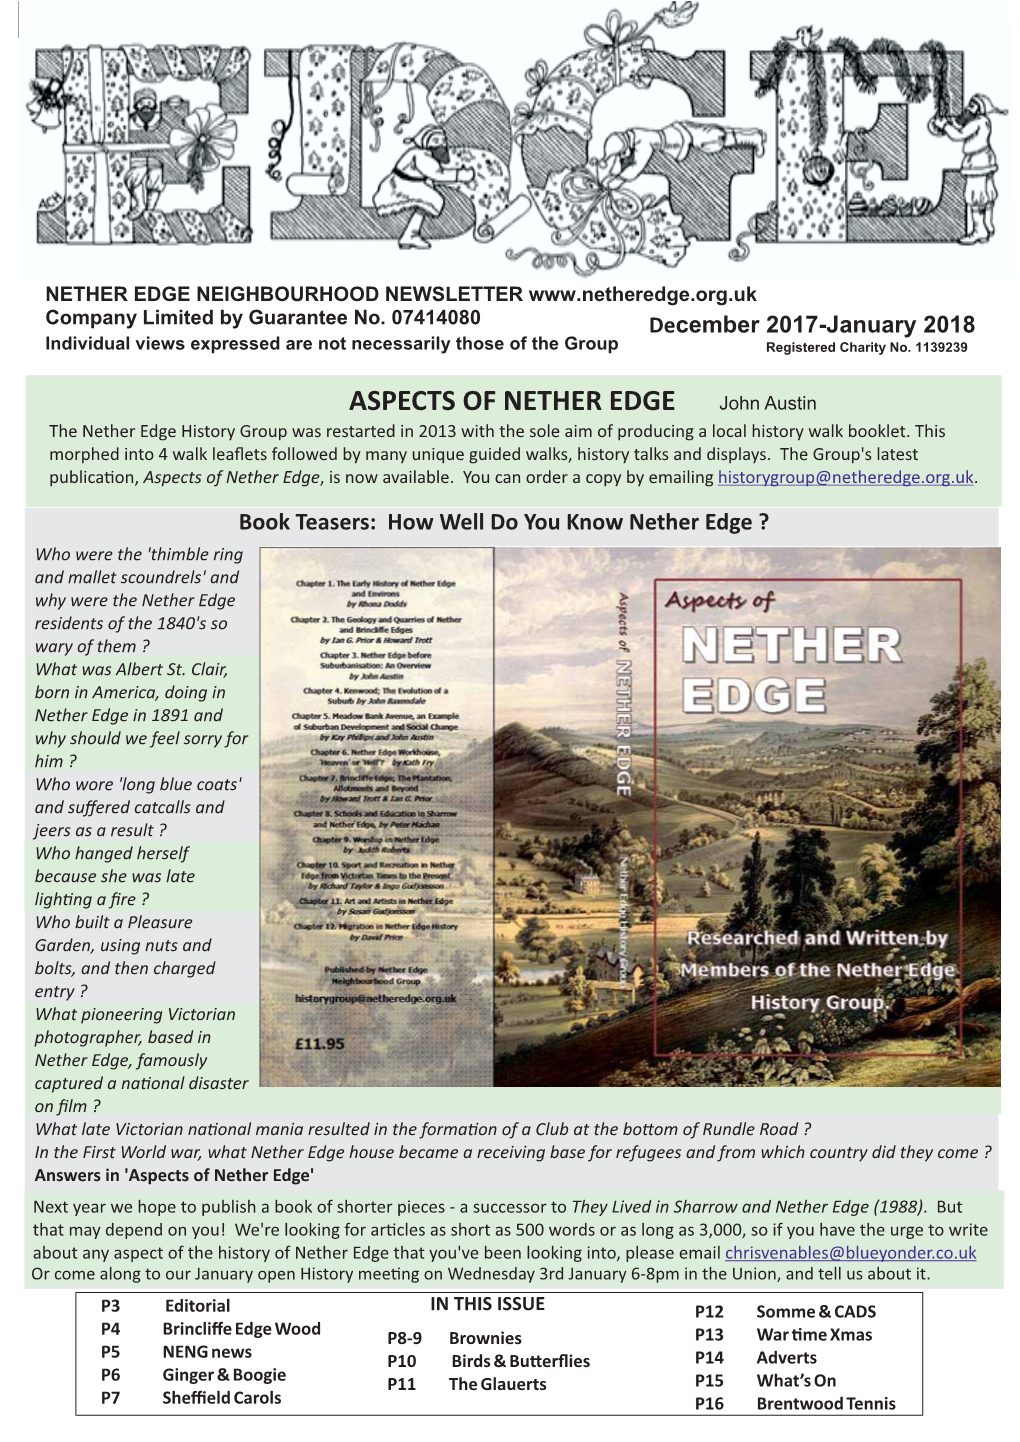 ASPECTS of NETHER EDGE John Austin the Nether Edge History Group Was Restarted in 2013 with the Sole Aim of Producing a Local History Walk Booklet